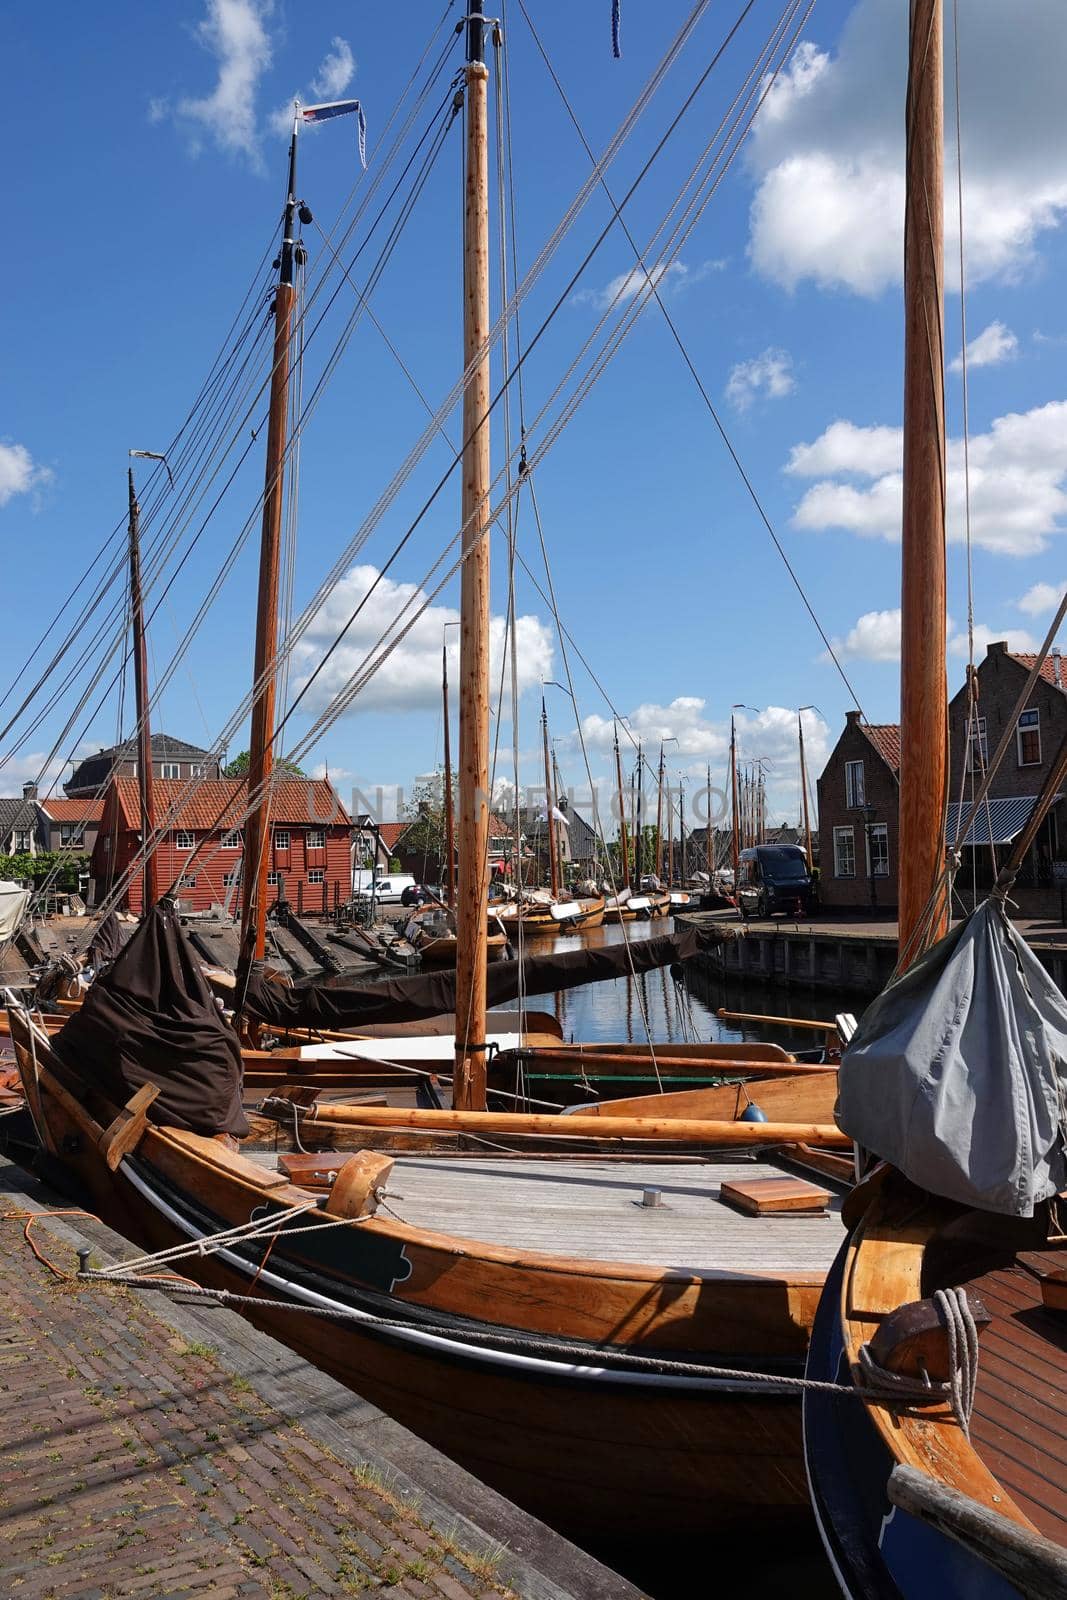 Wooden historical fishing cutters moored in Spakenburg by WielandTeixeira